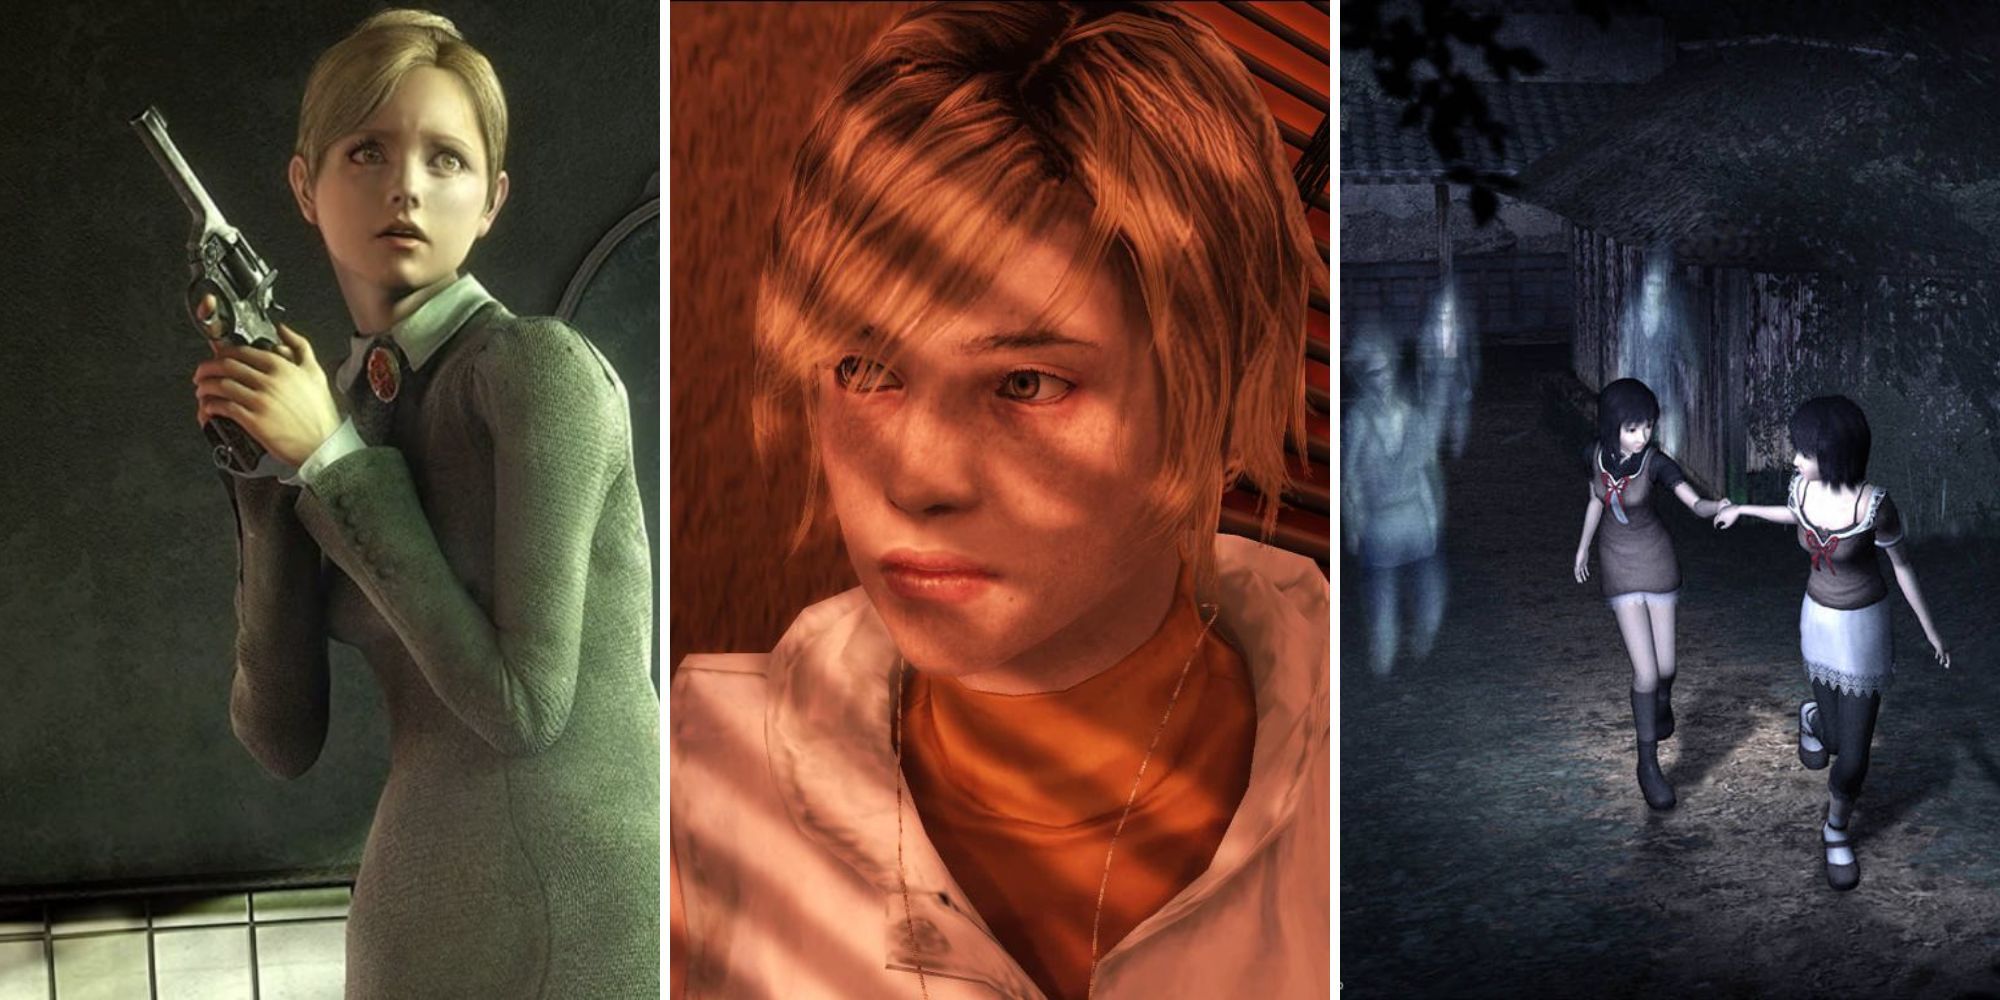 Collage of the Best PS2 Horror Games (Rule of Rose, Silent Hill 3, Fatal Frame 2)